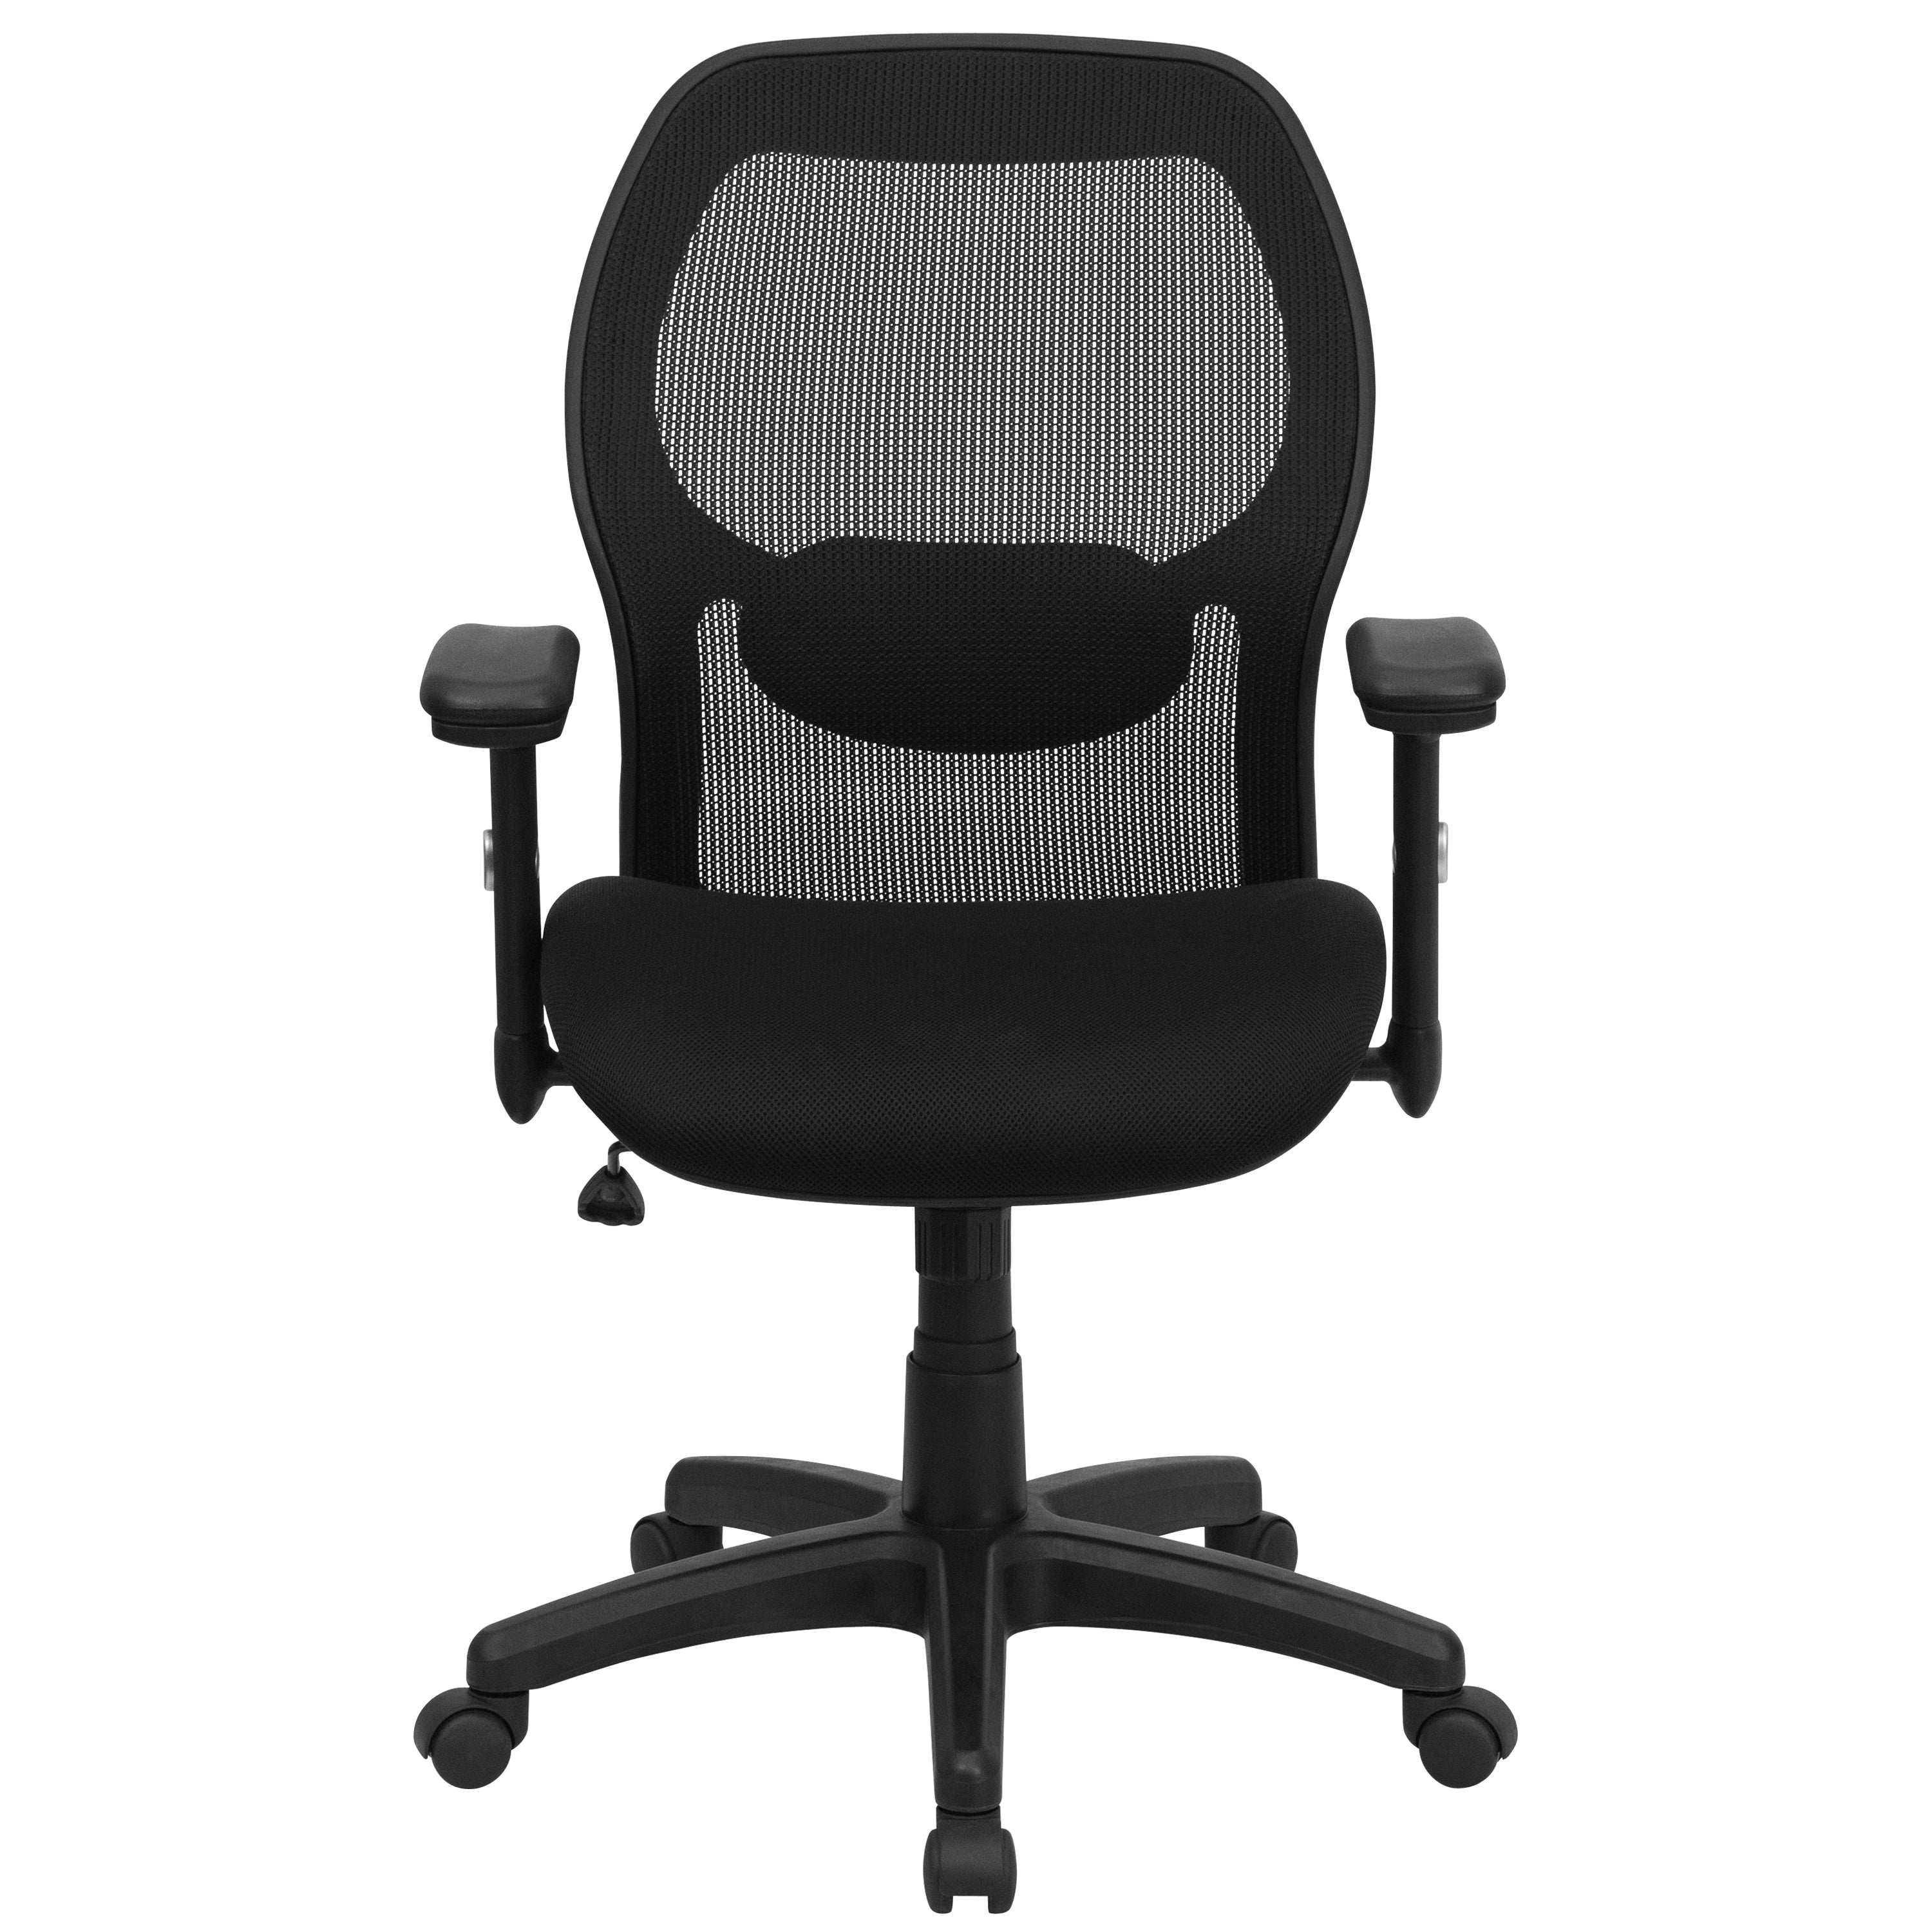 Mid-Back Super Mesh Executive Swivel Office Chair with Adjustable Arms-Office Chair-Flash Furniture-Wall2Wall Furnishings